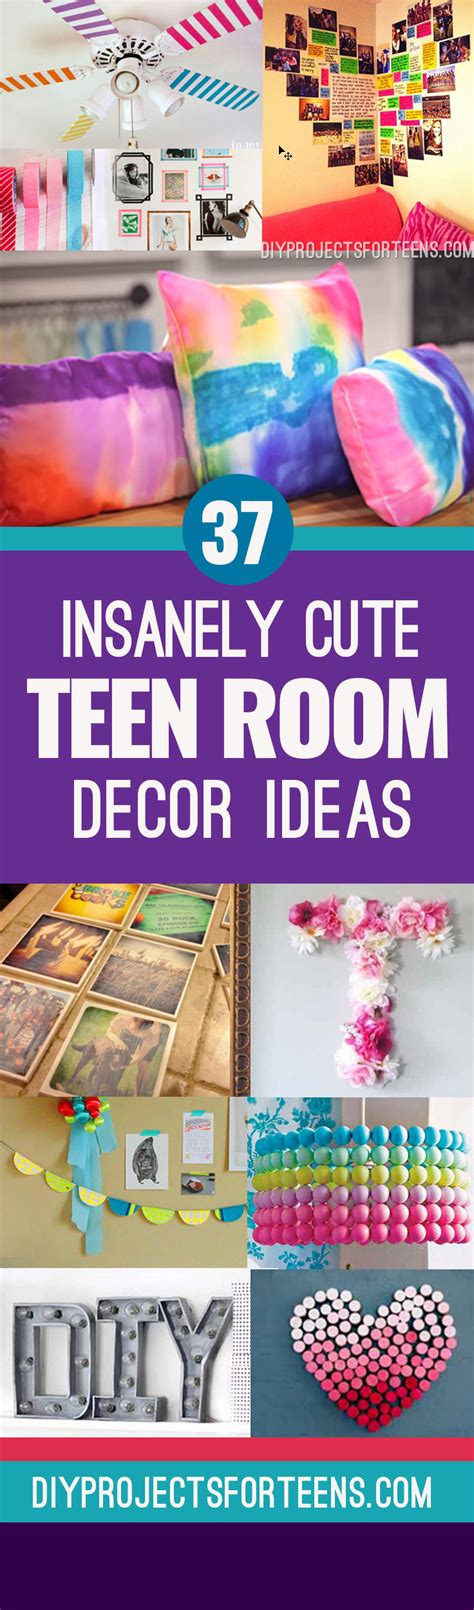 Test your woodworking skills and let some light into a dark room. 37 Insanely Cute Teen Bedroom Ideas for DIY Decor | Crafts ...